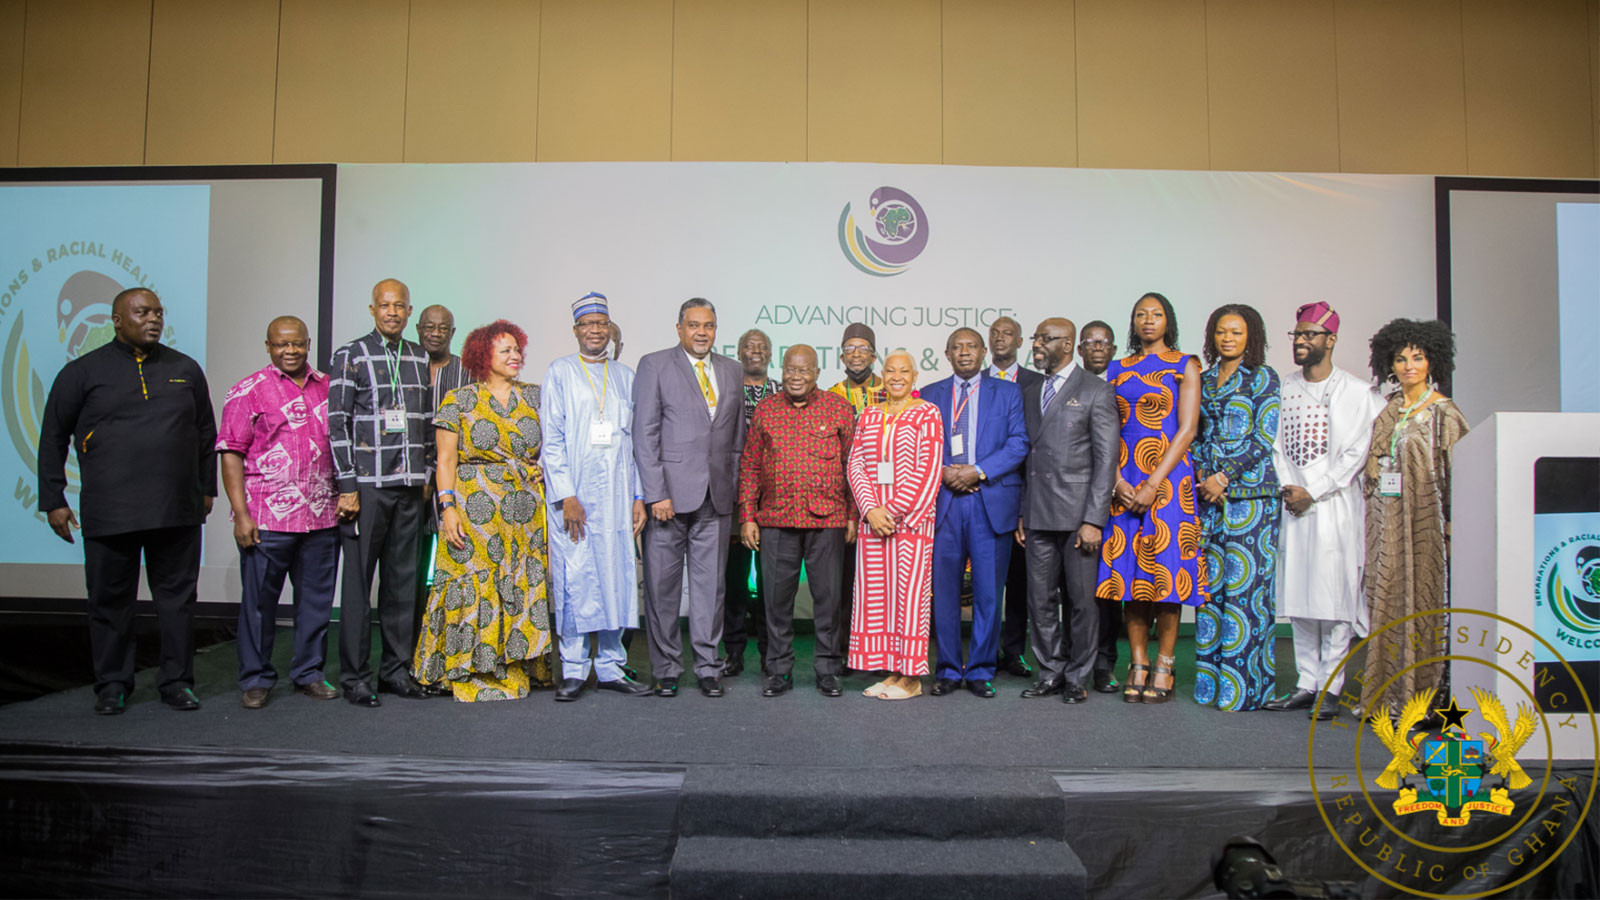 Communiqué: Groundbreaking Global Summit on Reparations and Racial Healing Sets a New Standard for Reparations Advocacy